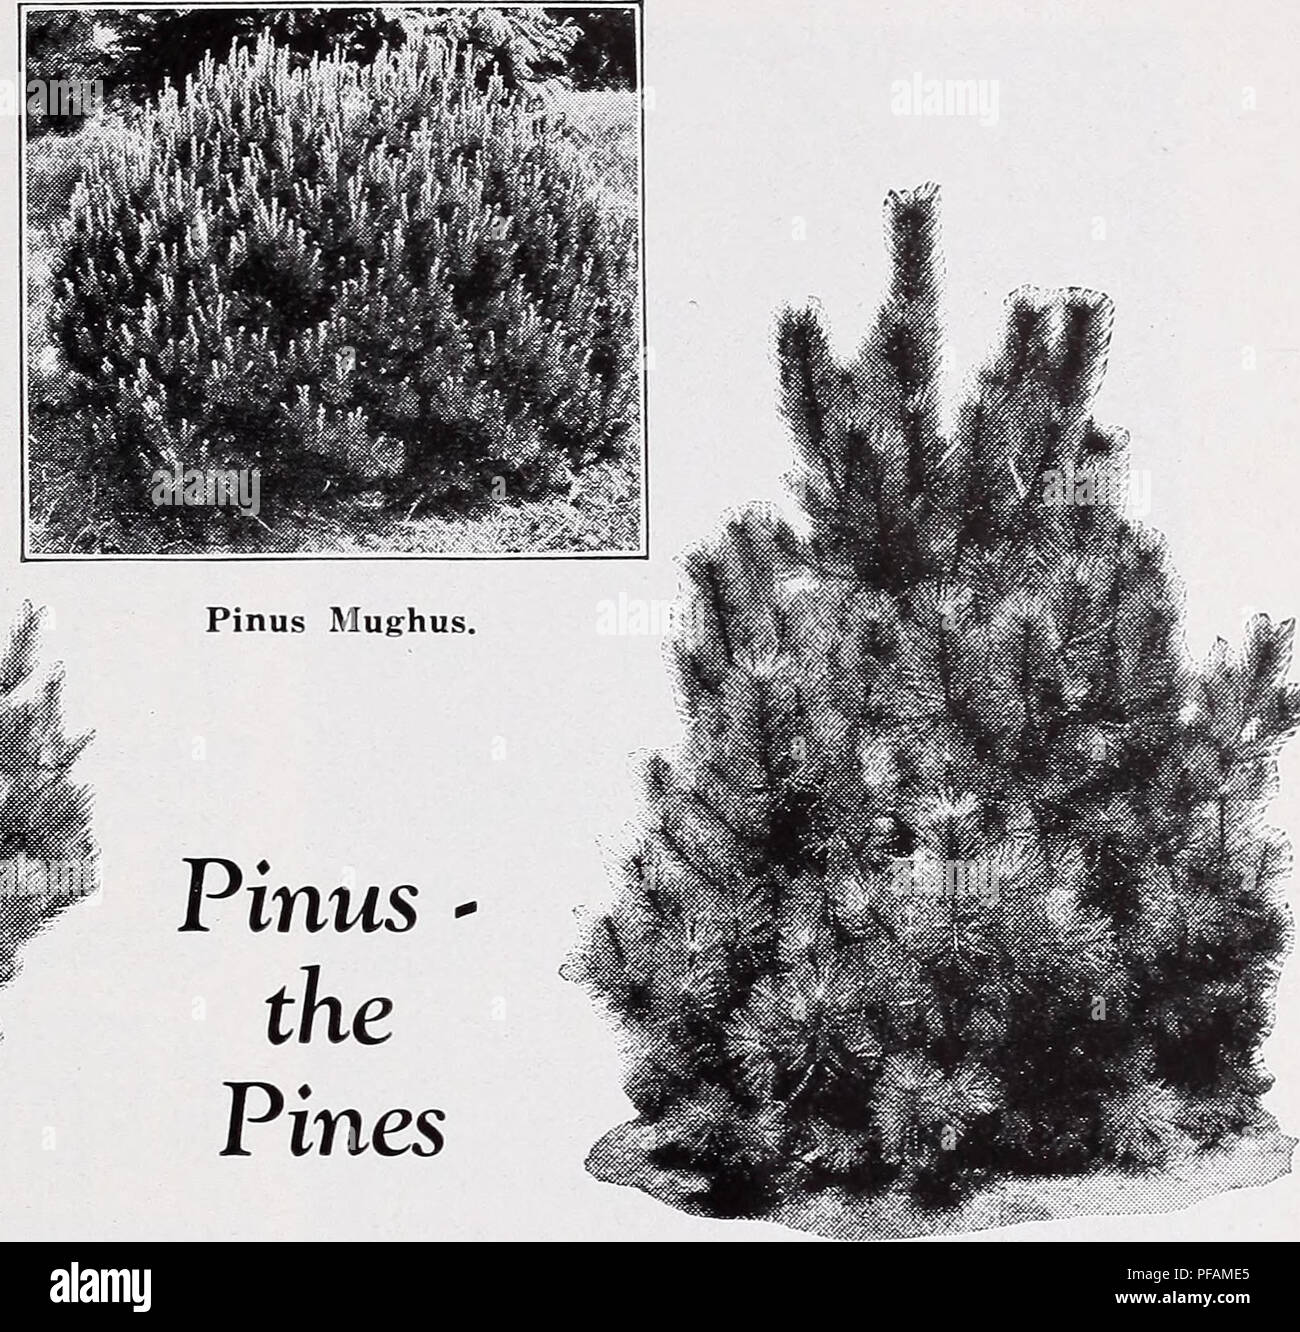 . Descriptive price list. Nurseries Horticulture Catalogs; Evergreens Catalogs; Fruit trees Catalogs; Shrubs Catalogs; Climbing plants Catalogs. Pinus - the Pines Pinus Austriaca. PINUS austriaca (Austrian Pine). Its growth, even when young, is characteristically stout and sturdy ; foliage very dark and massive in effect and when planted in an appropriate location is distinct and unique. Each 10 1% to 2 ft $1.50 $12.50 2 to 2i/2 ft 2.00 15.00 2y2 to 3 ft 2.50 20.00 3 to 31/0 ft 3.00 25.00 31/0 to 4 ft 3.50 30.00 4 to 4% ft 5.00 40.00 41/2 to 5 ft 6.00 50.00 5 to 51/2 ft. 7.00 60.00 P. mughus ( Stock Photo